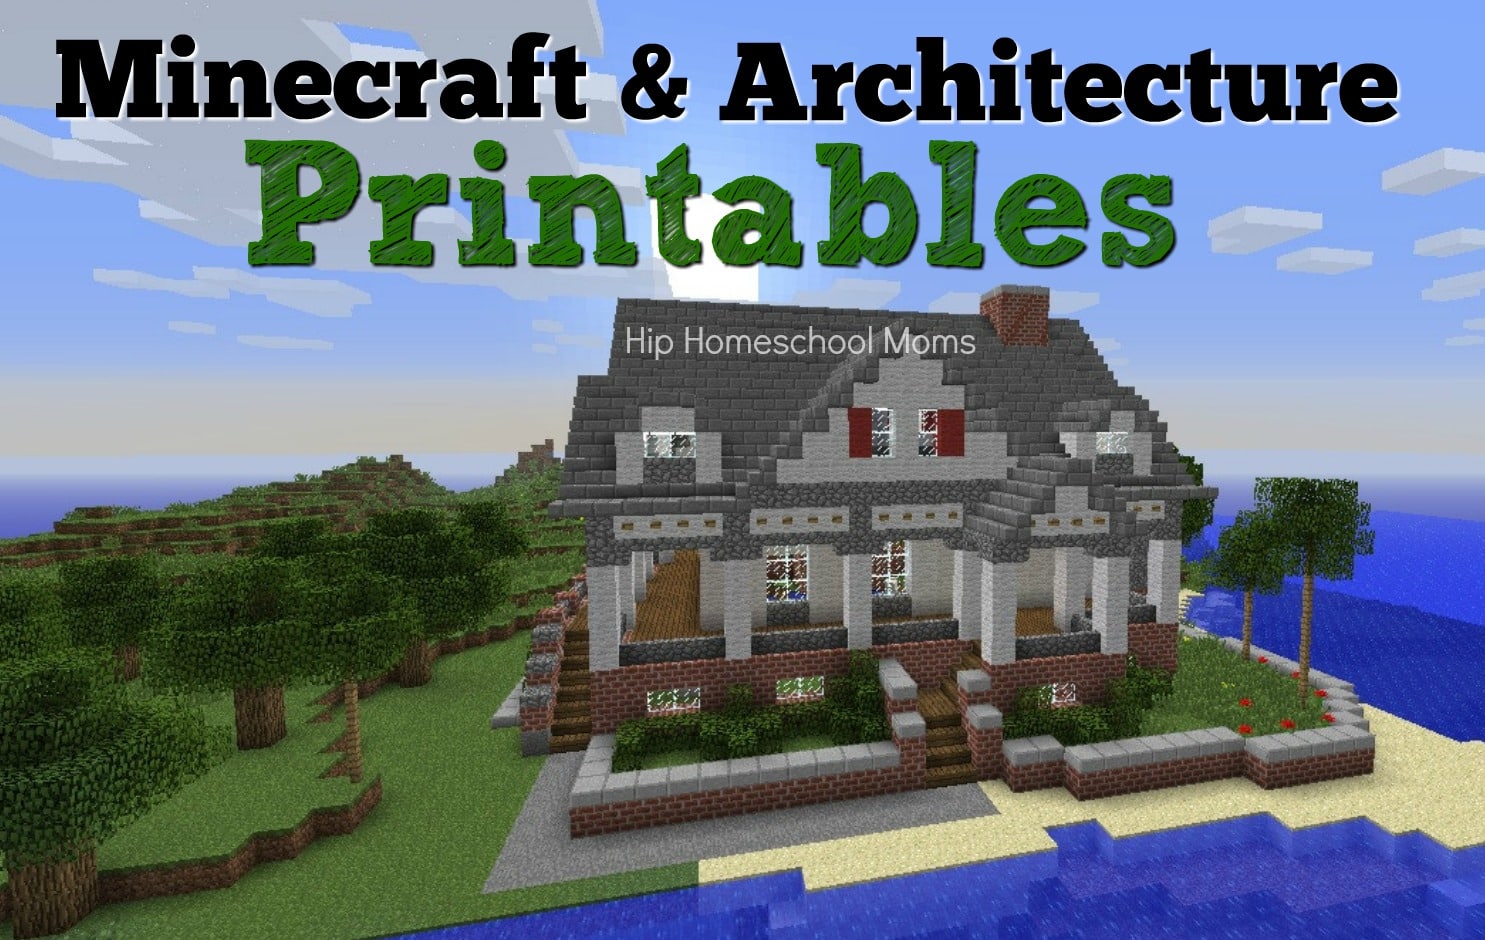 Minecraft and Architecture Printables